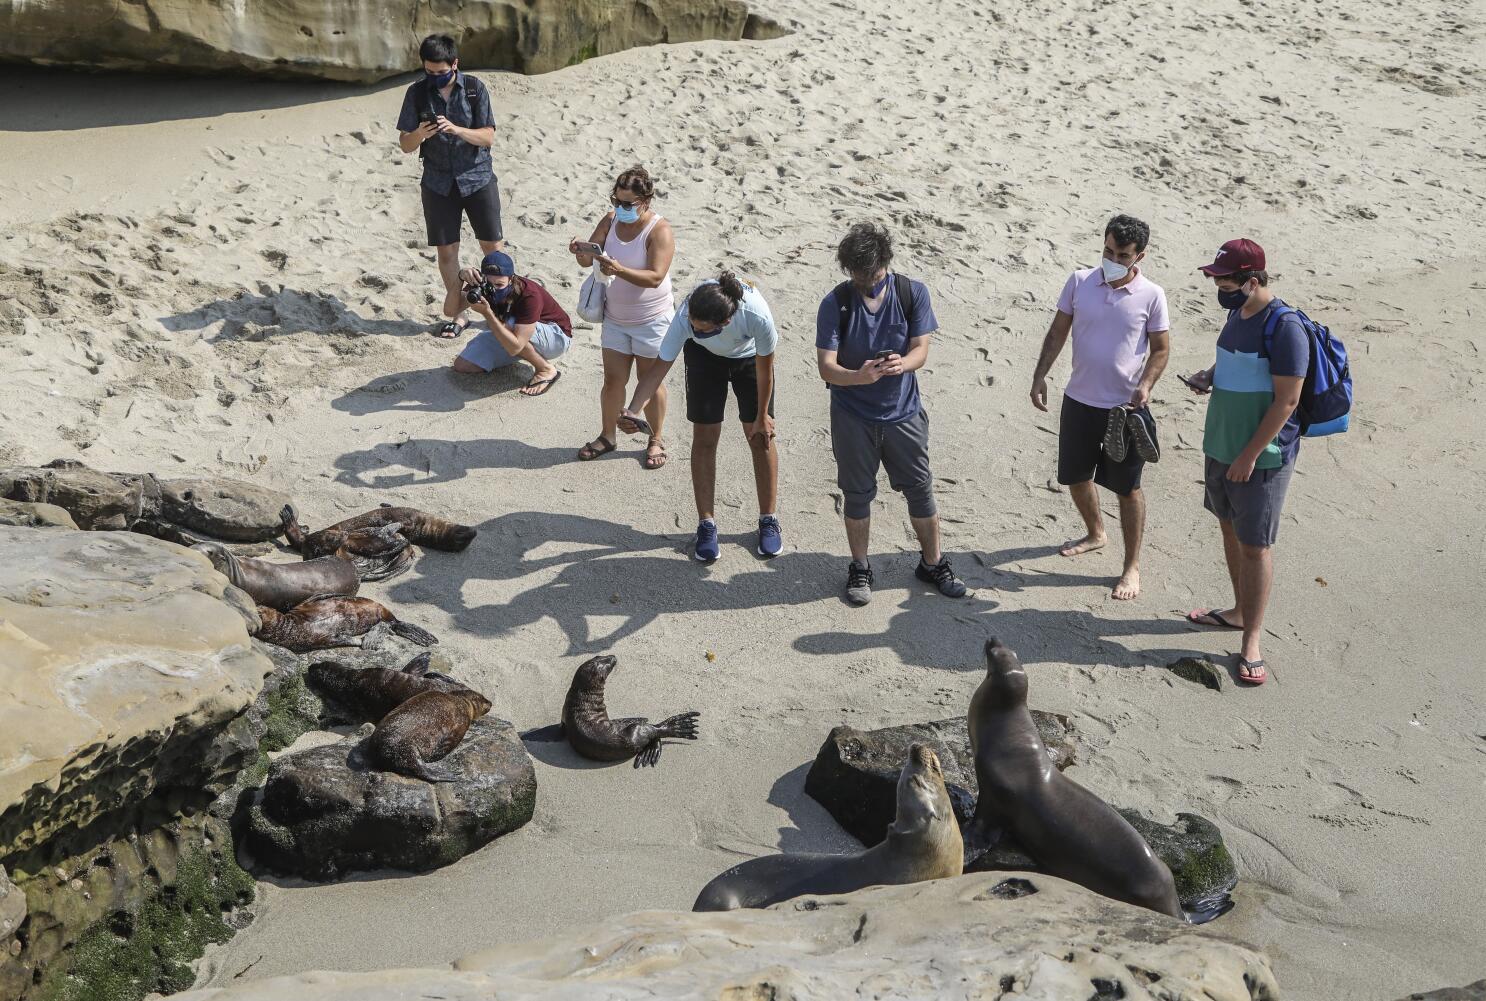 La Jolla Sets 'Crisis in the Cove' Hearing on Seal Problems - Times of San  Diego